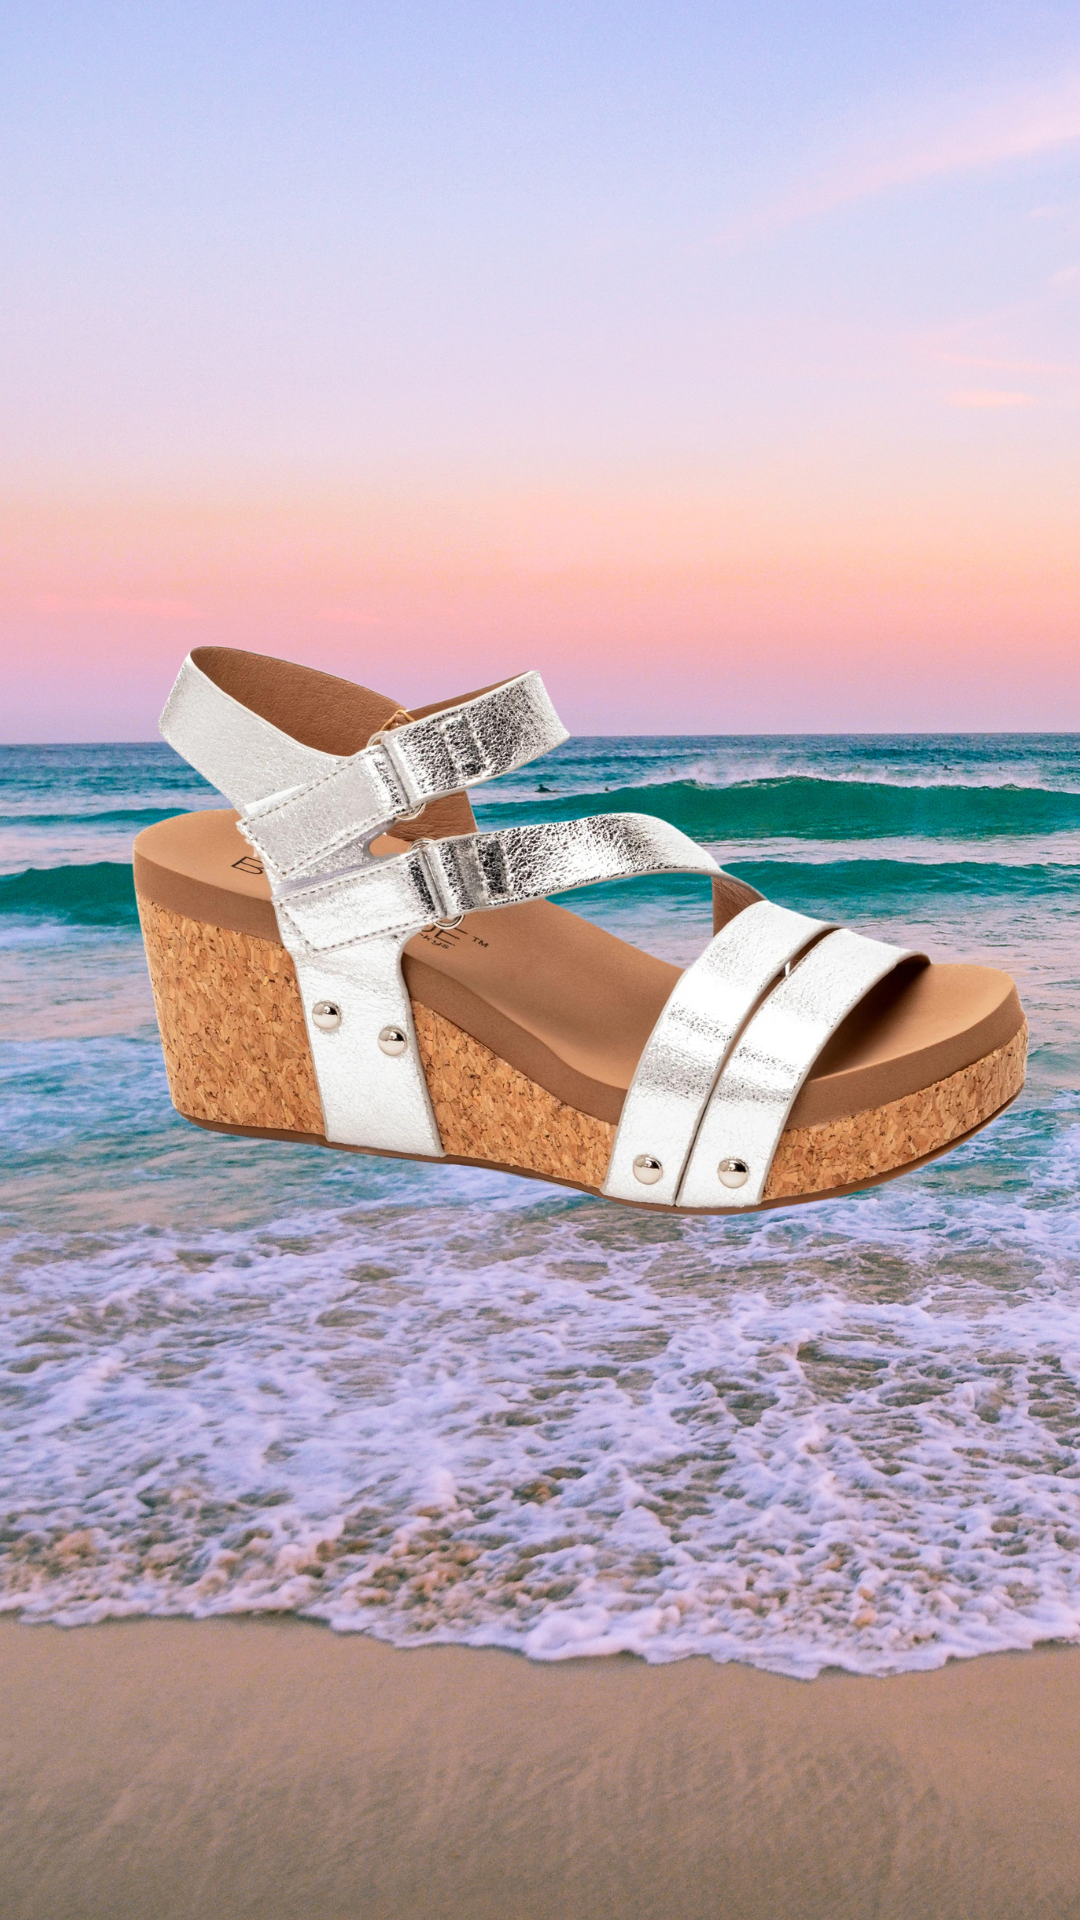 Market Live Preorder: Giggle Wedge by Corky’s (Ships in 2-3 Weeks)